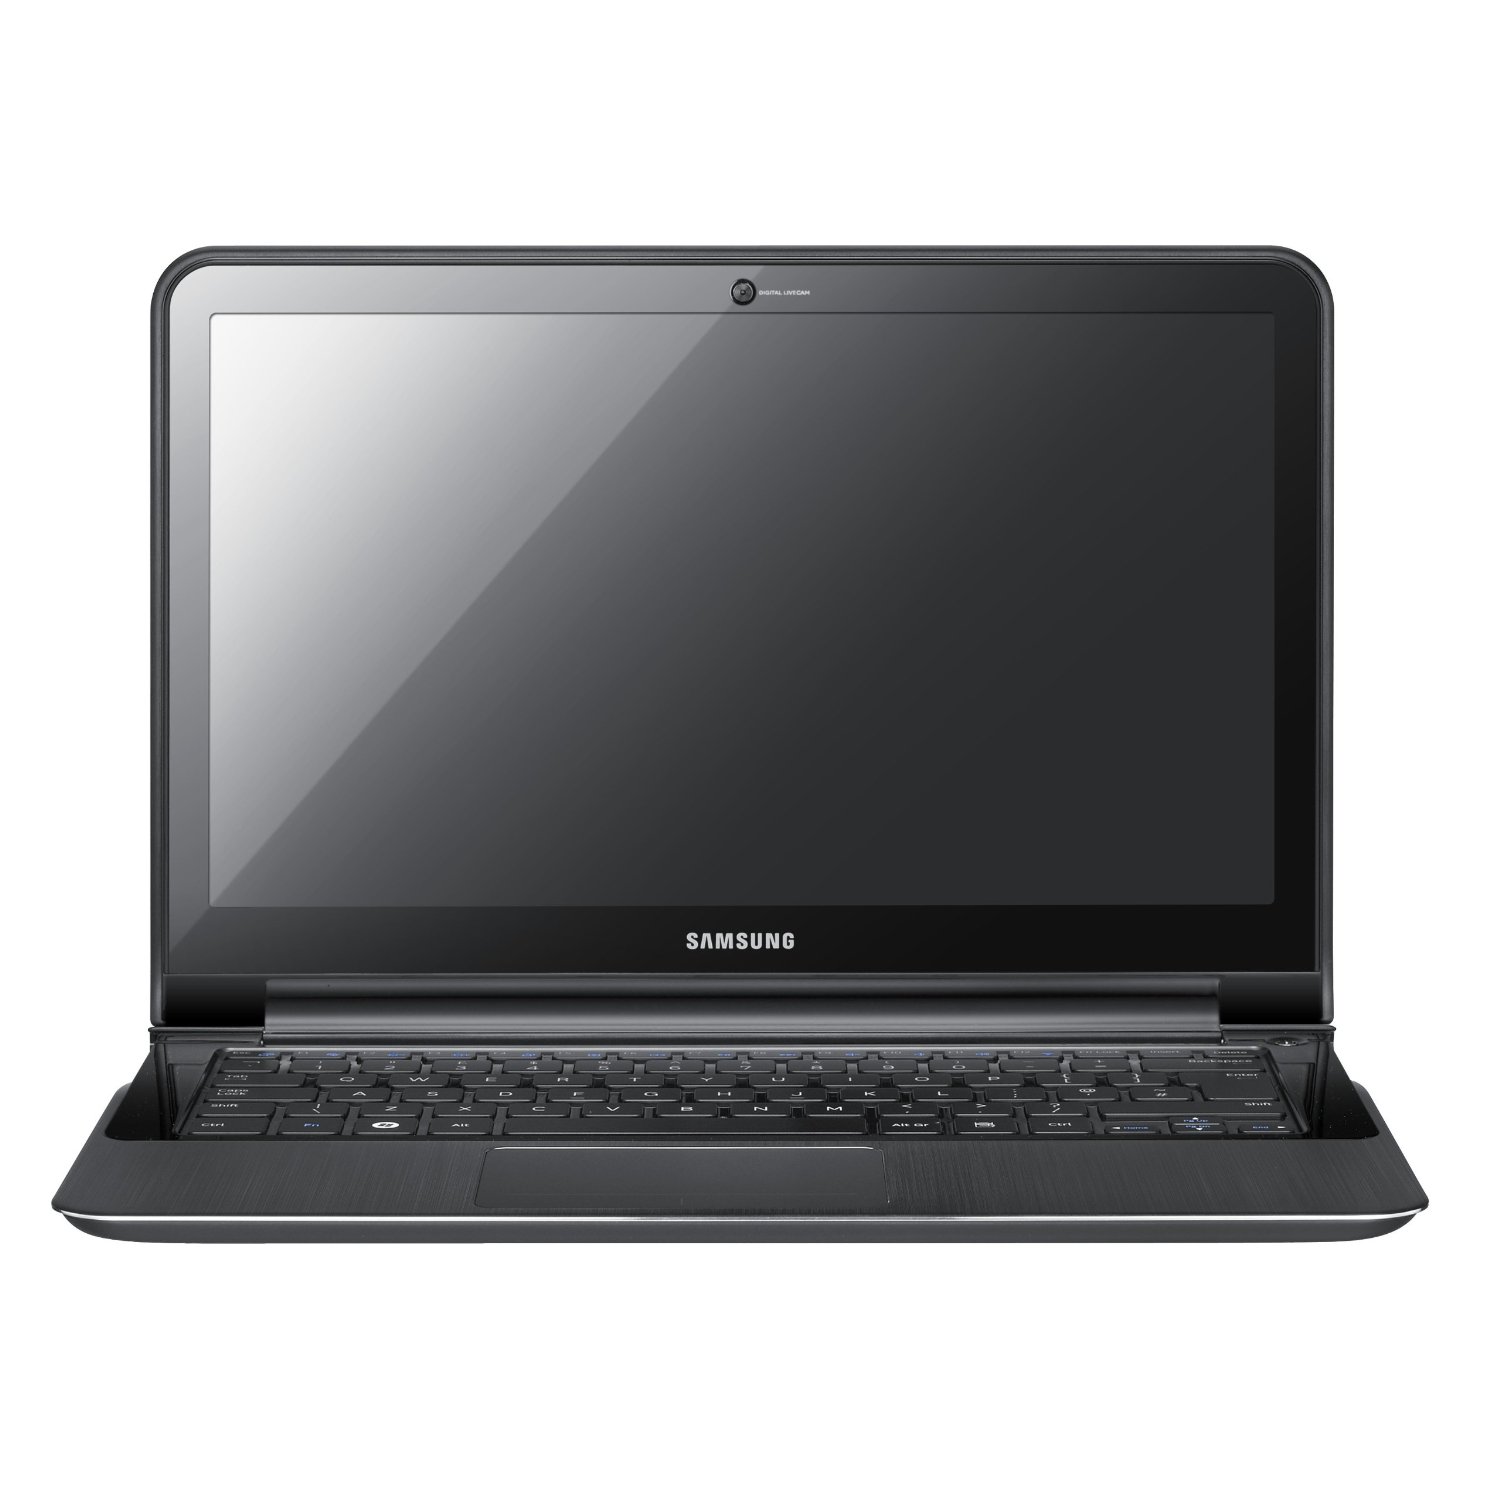 http://thetechjournal.com/wp-content/uploads/images/1108/1313814425-samsung-series-9-np900x1aa01us-116inch-laptop-1.jpg